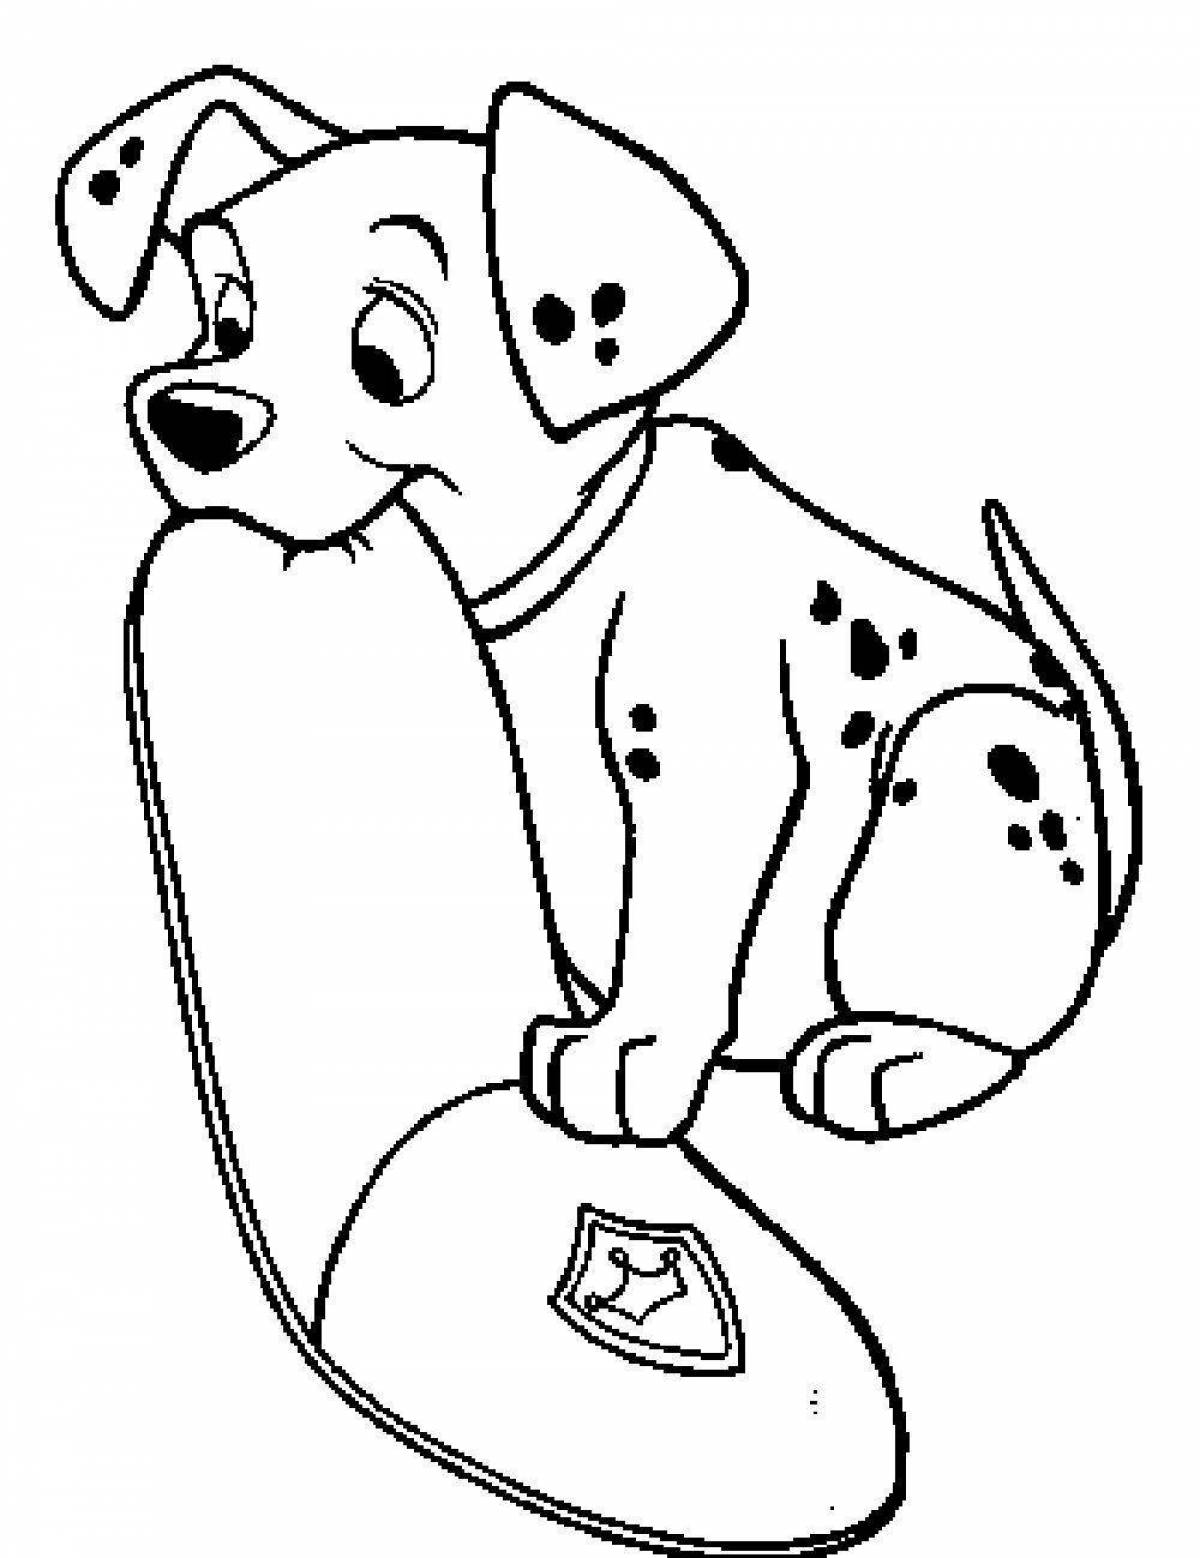 Coloring page energetic dalmatian dog